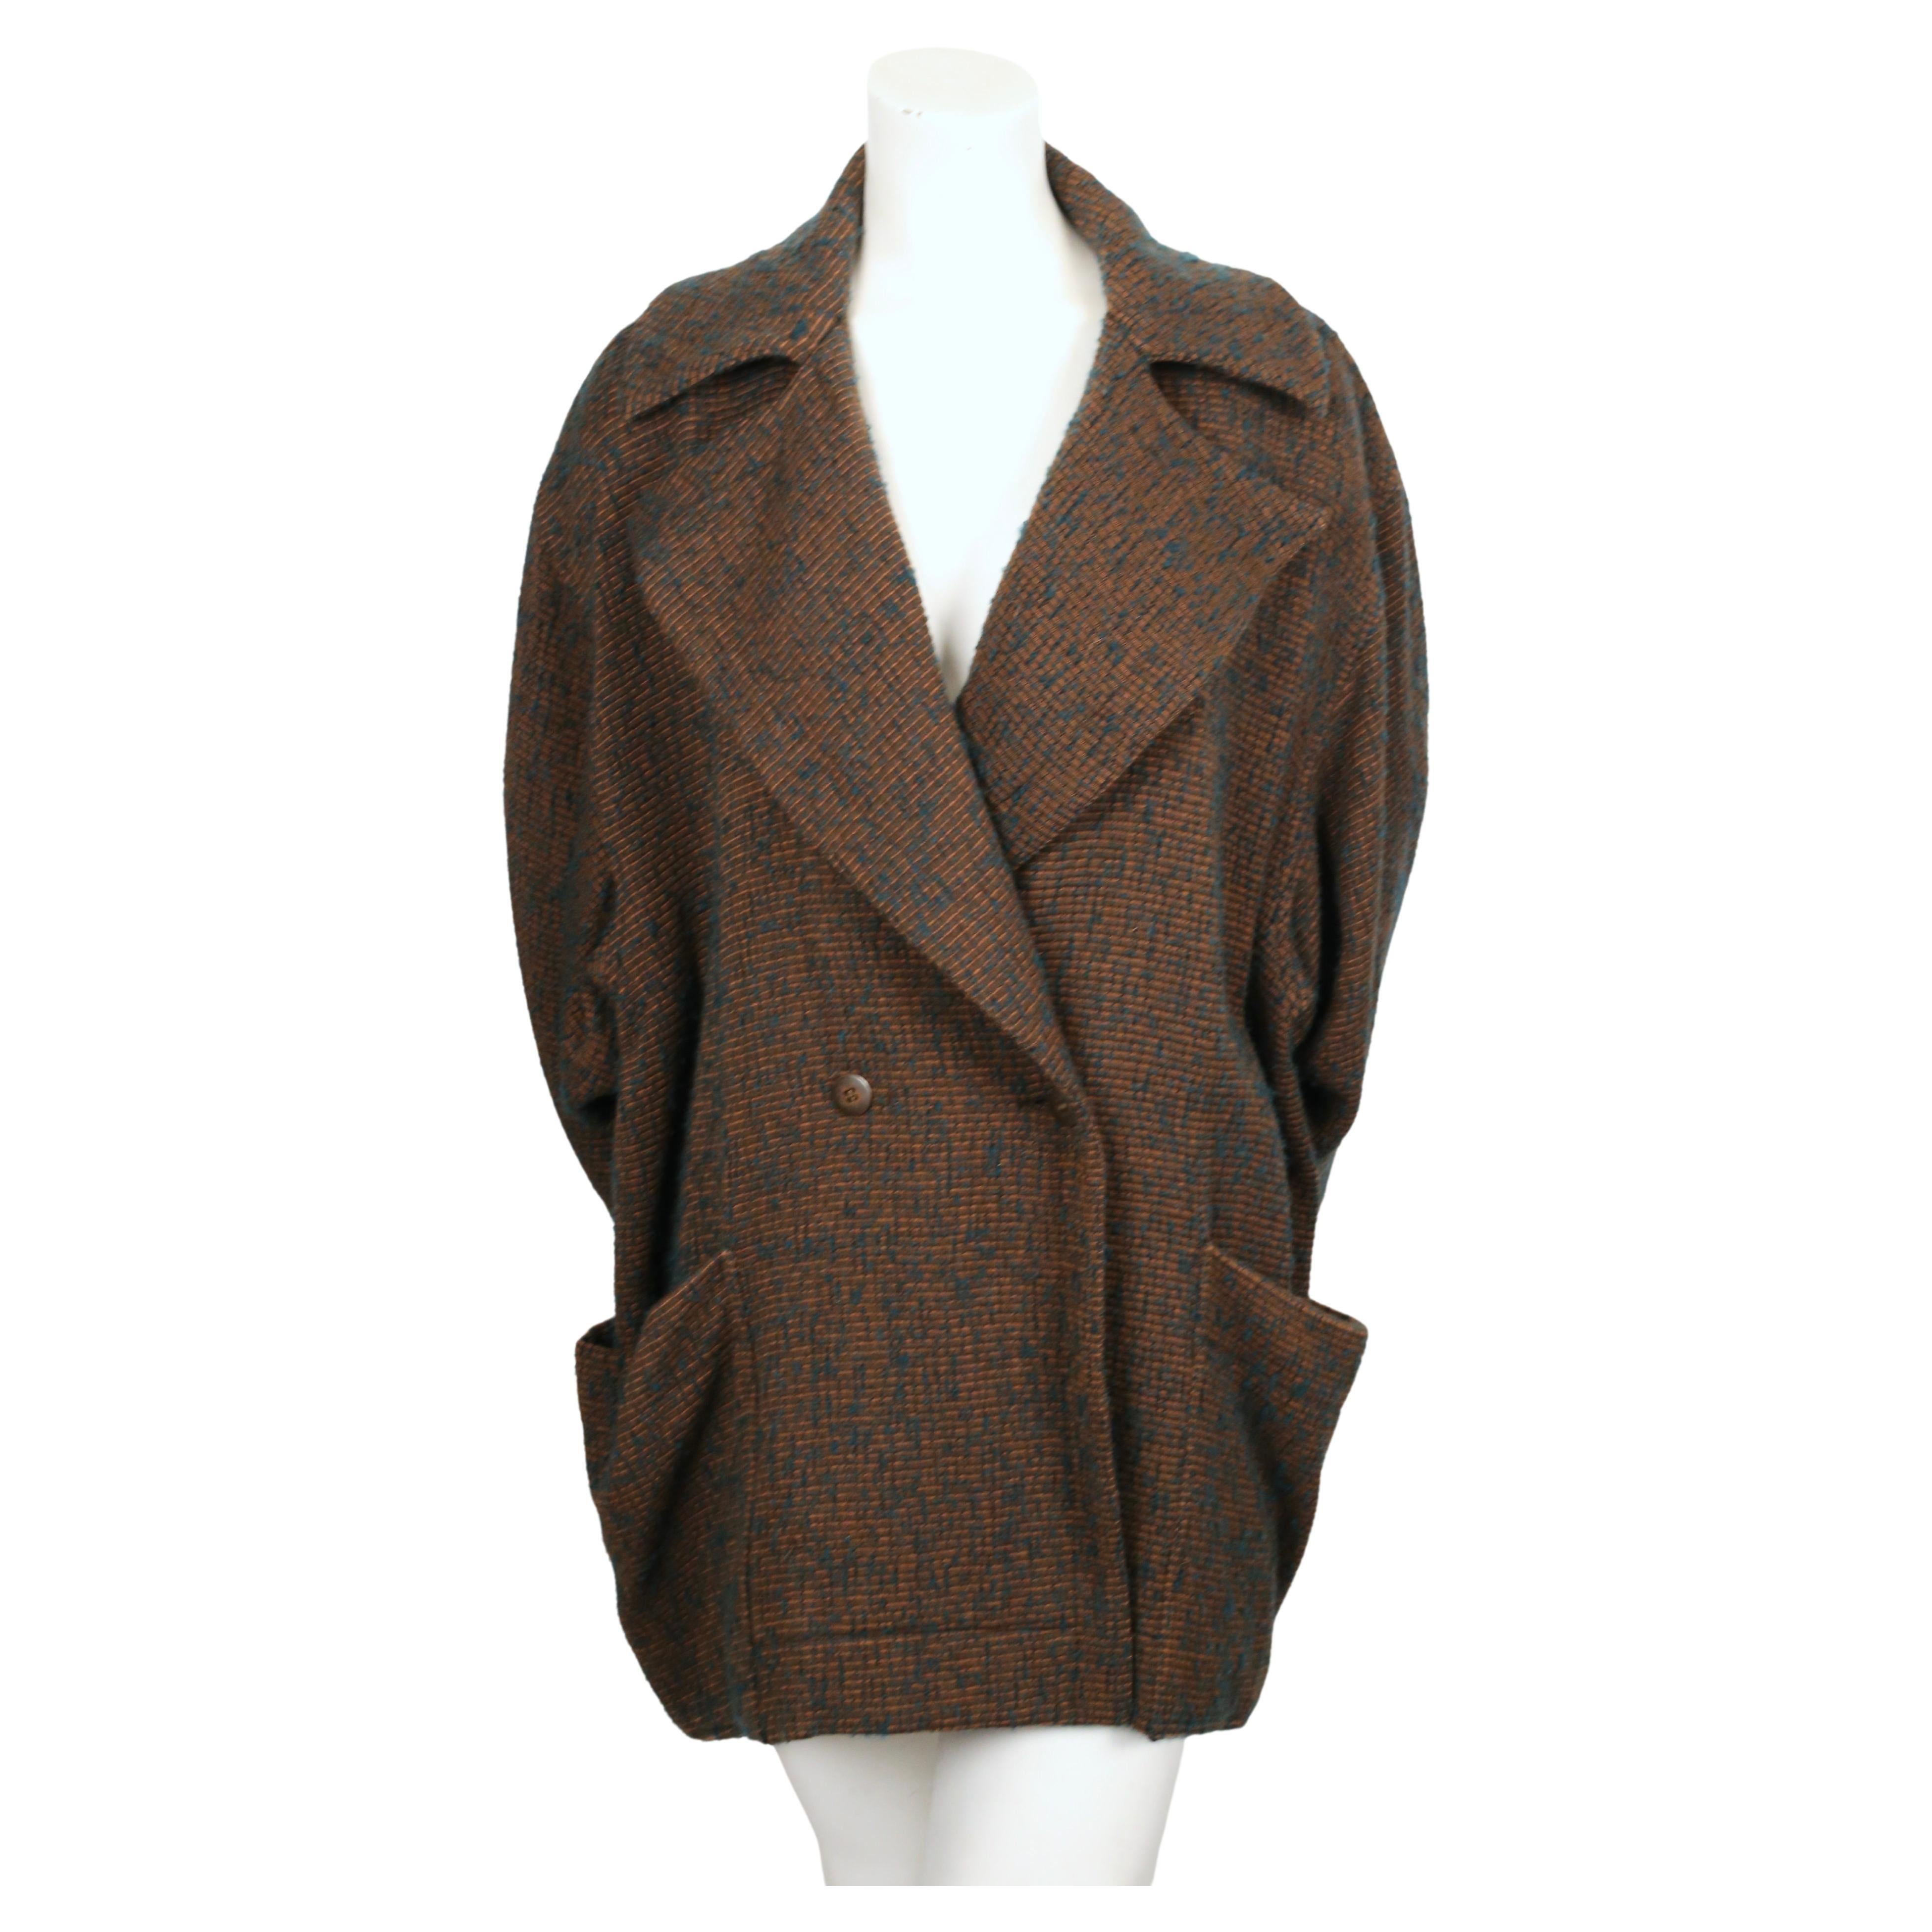 Brown and turquoise boucle wool coat with open collar and wrap around pockets designed by Azzedine Alaia dating to the late 1980's. Coat is labeled a French size 38 however it is very oversized so it fits many sizes. Approximate measurements: drop